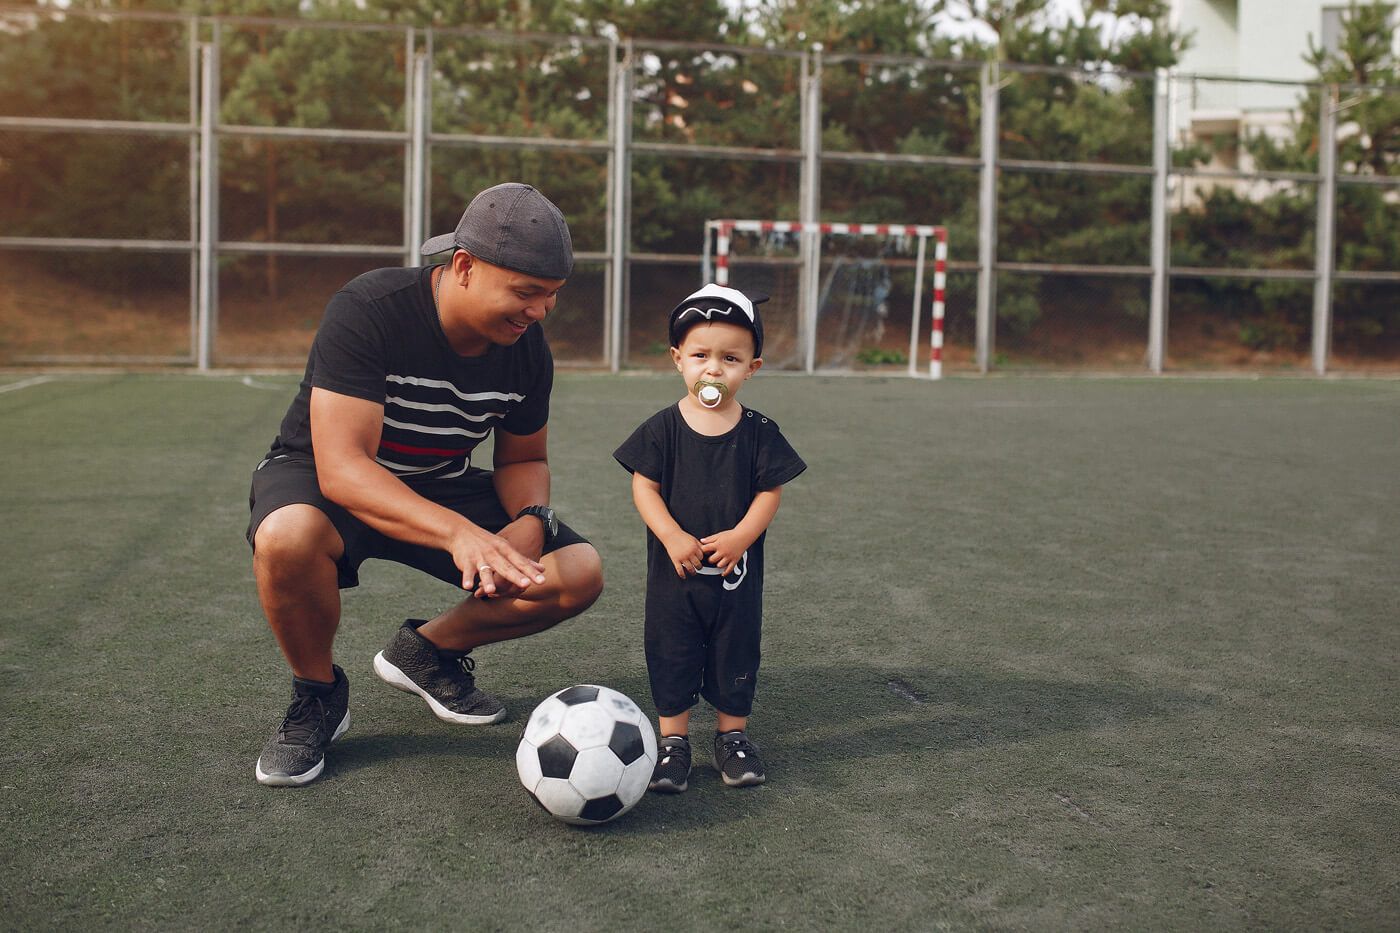 father and son on a field learning soccer